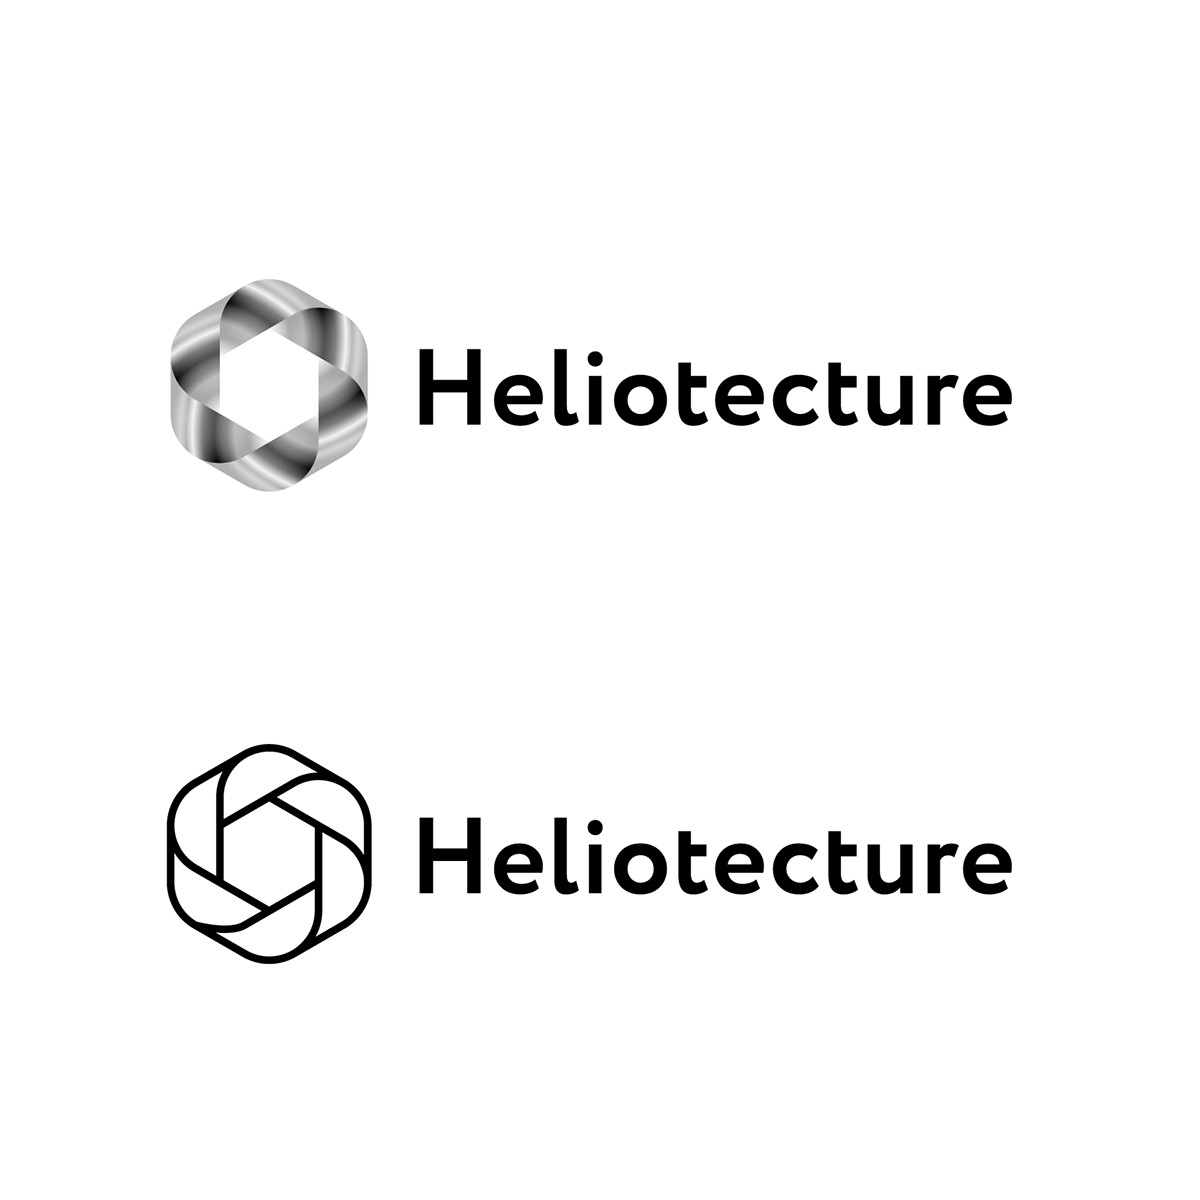 Heliotecture Ecologigal social symbol Logotype